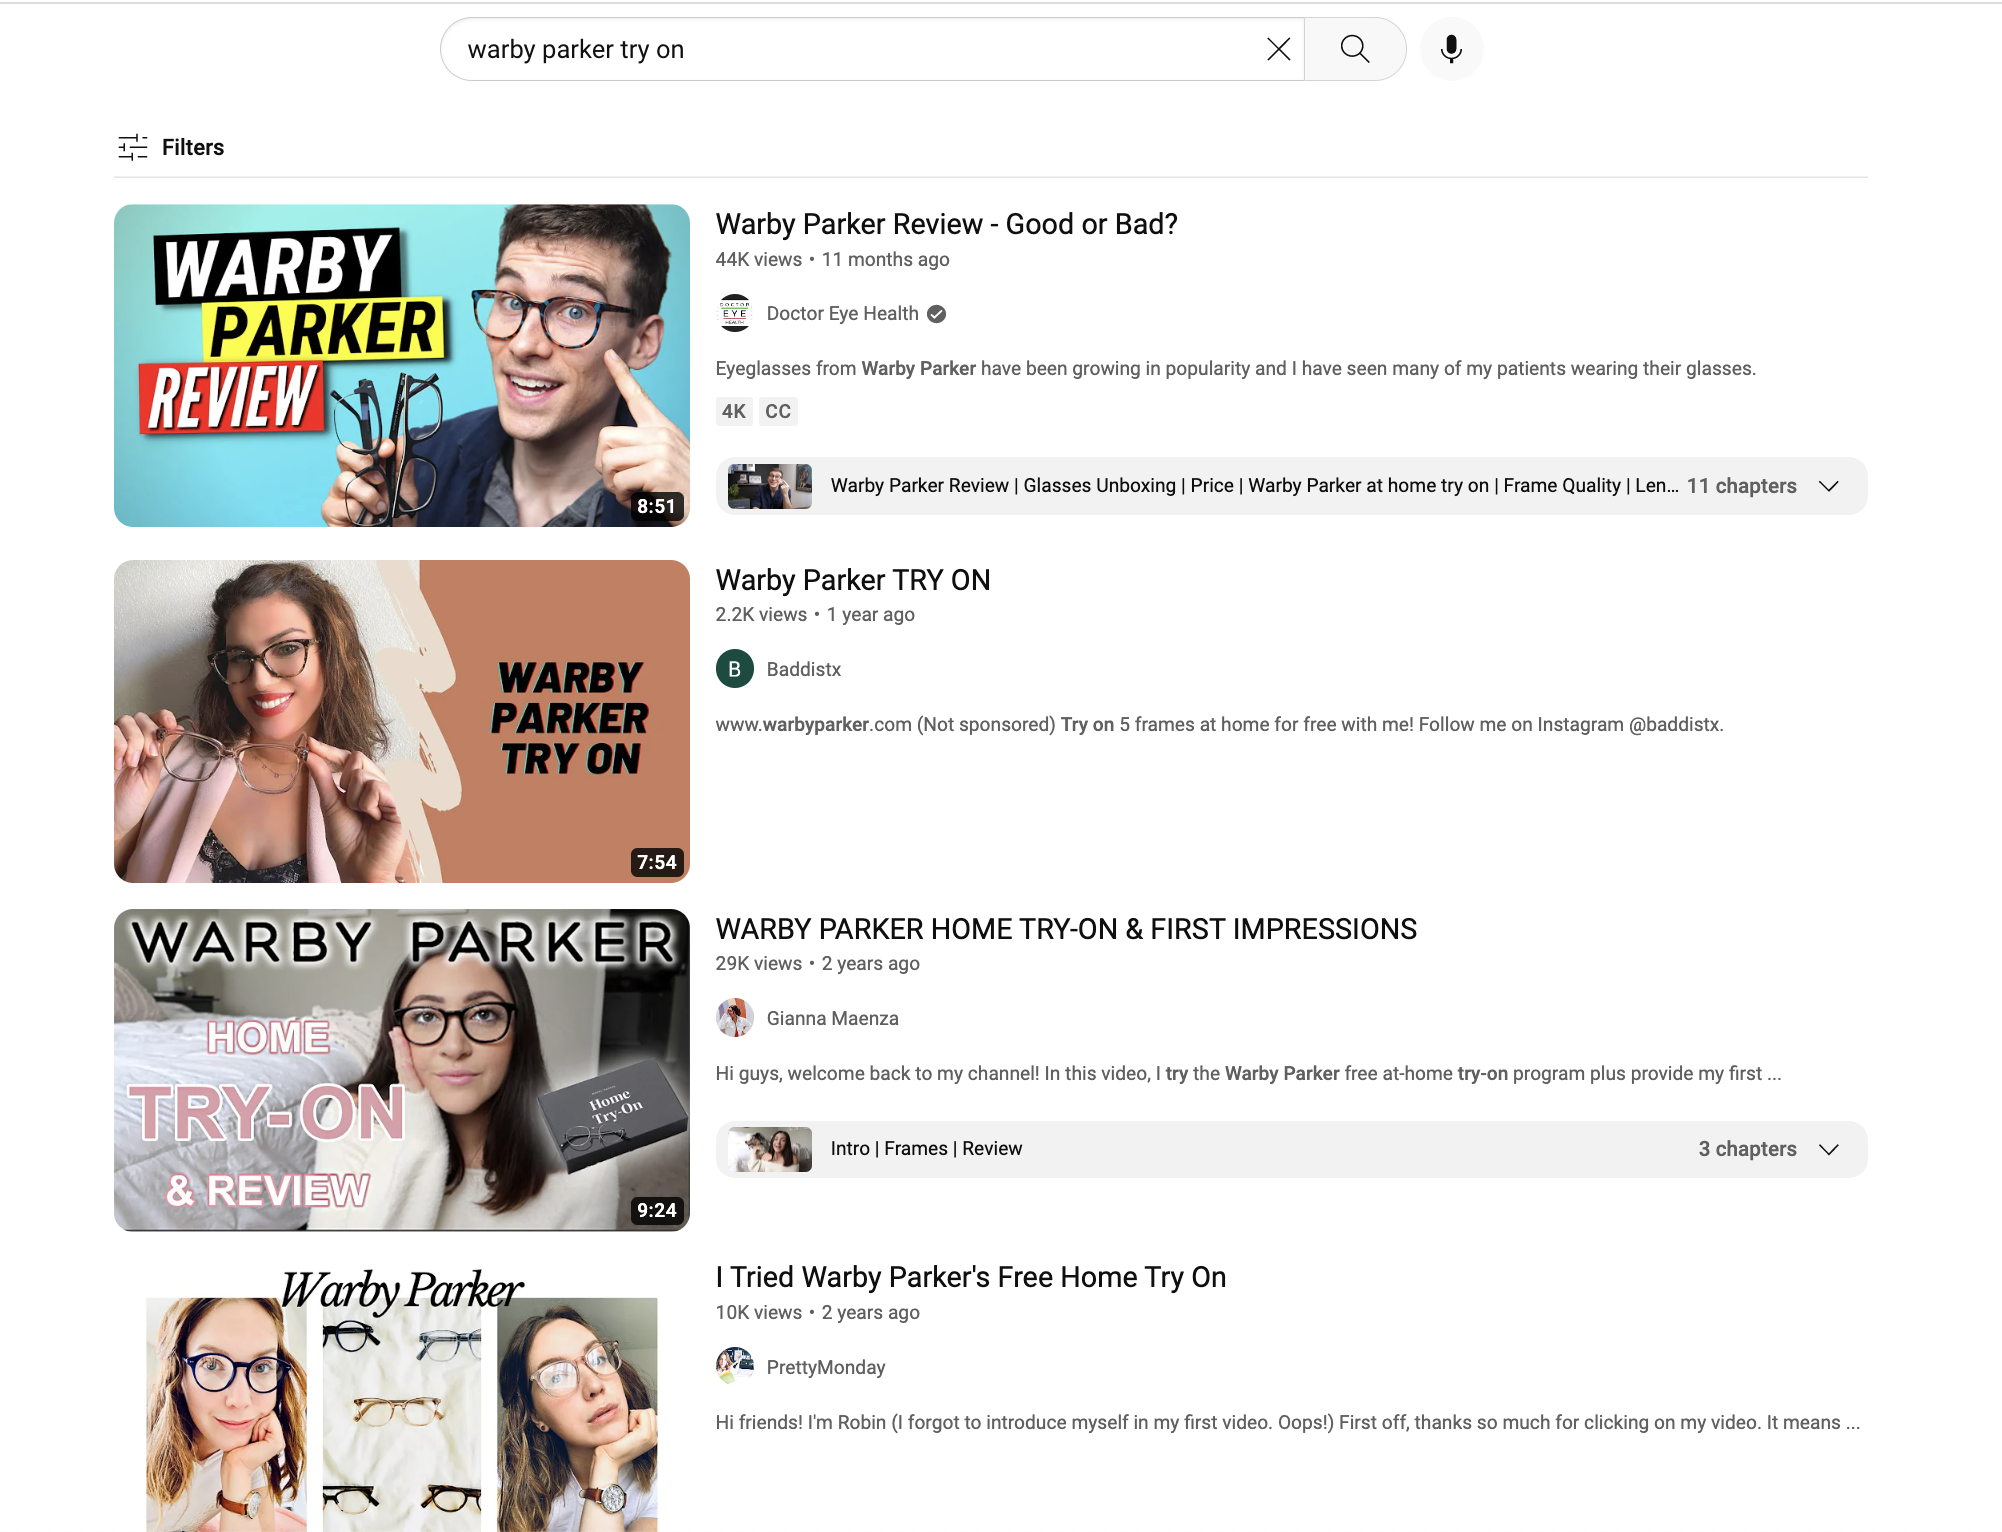 Warby parker try on youtube campaign 